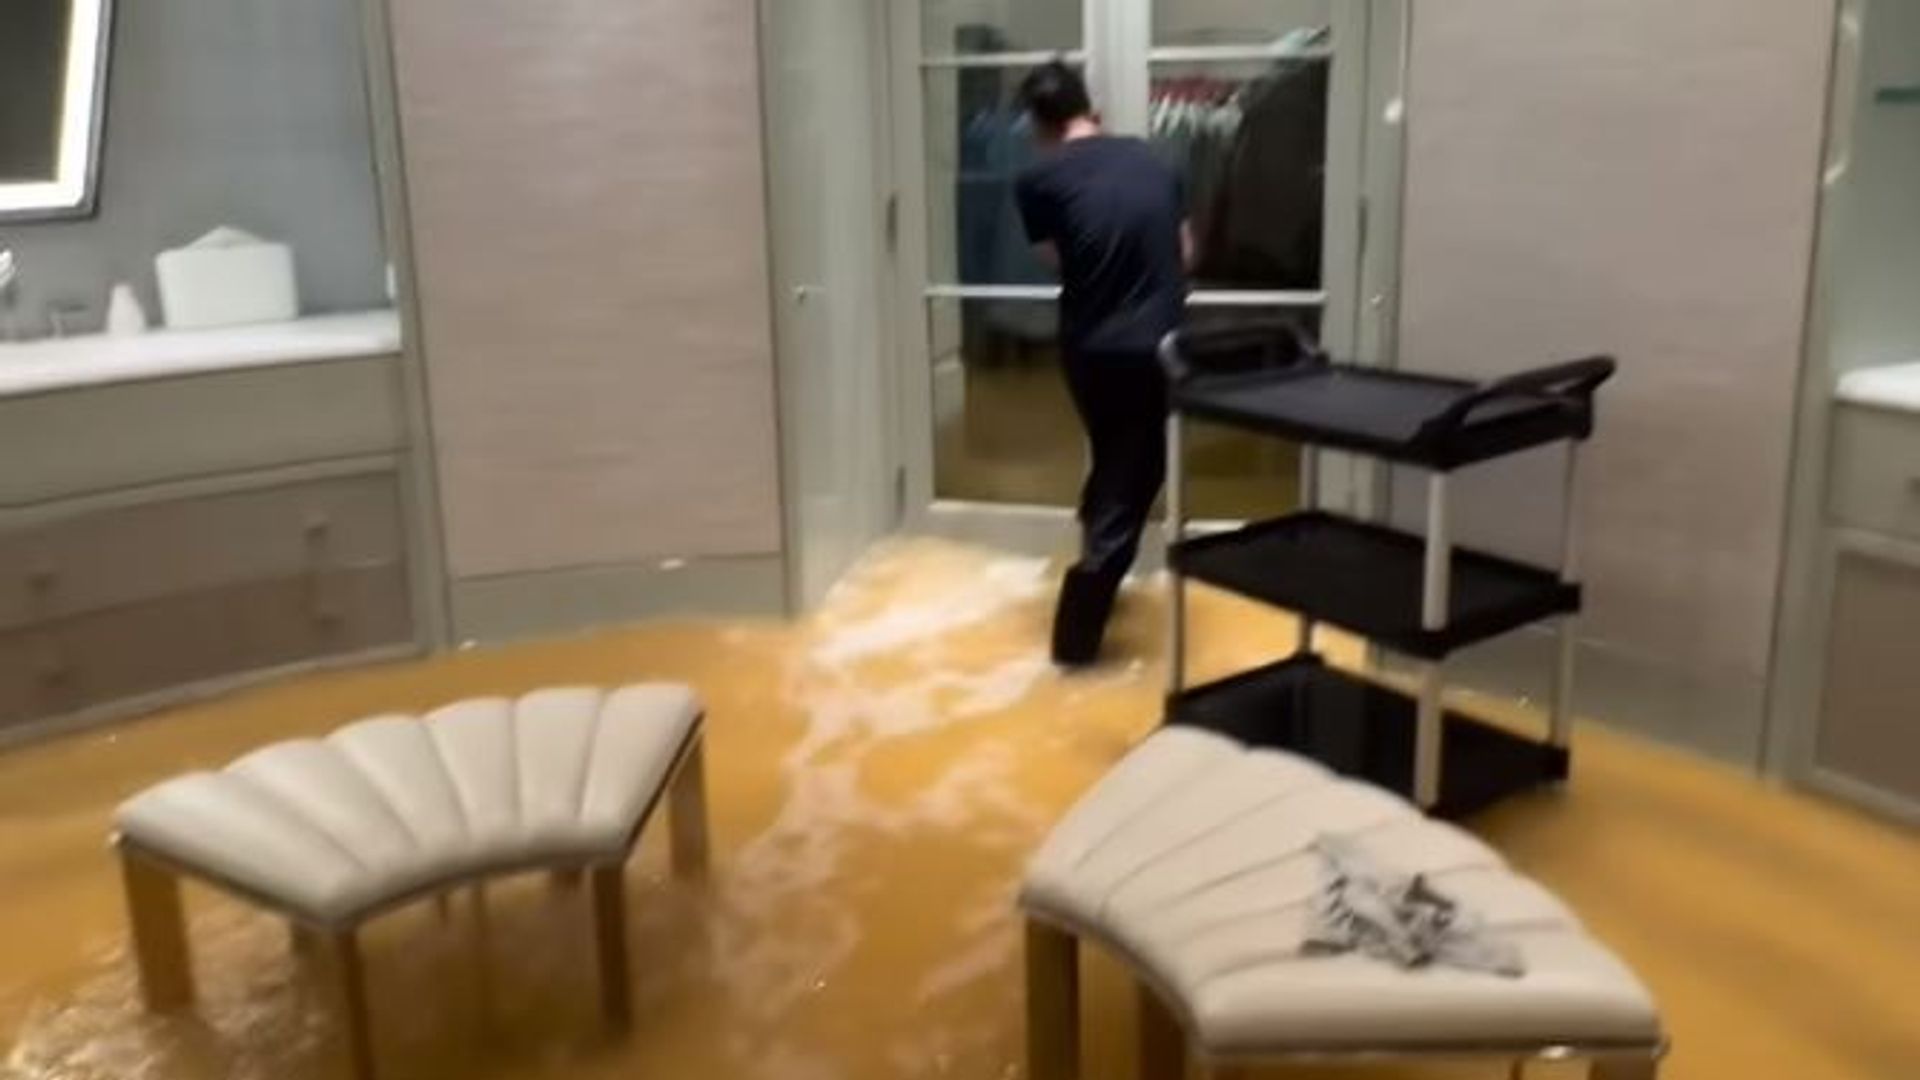 Drake's home hit by floods - but rapper sees the funny side